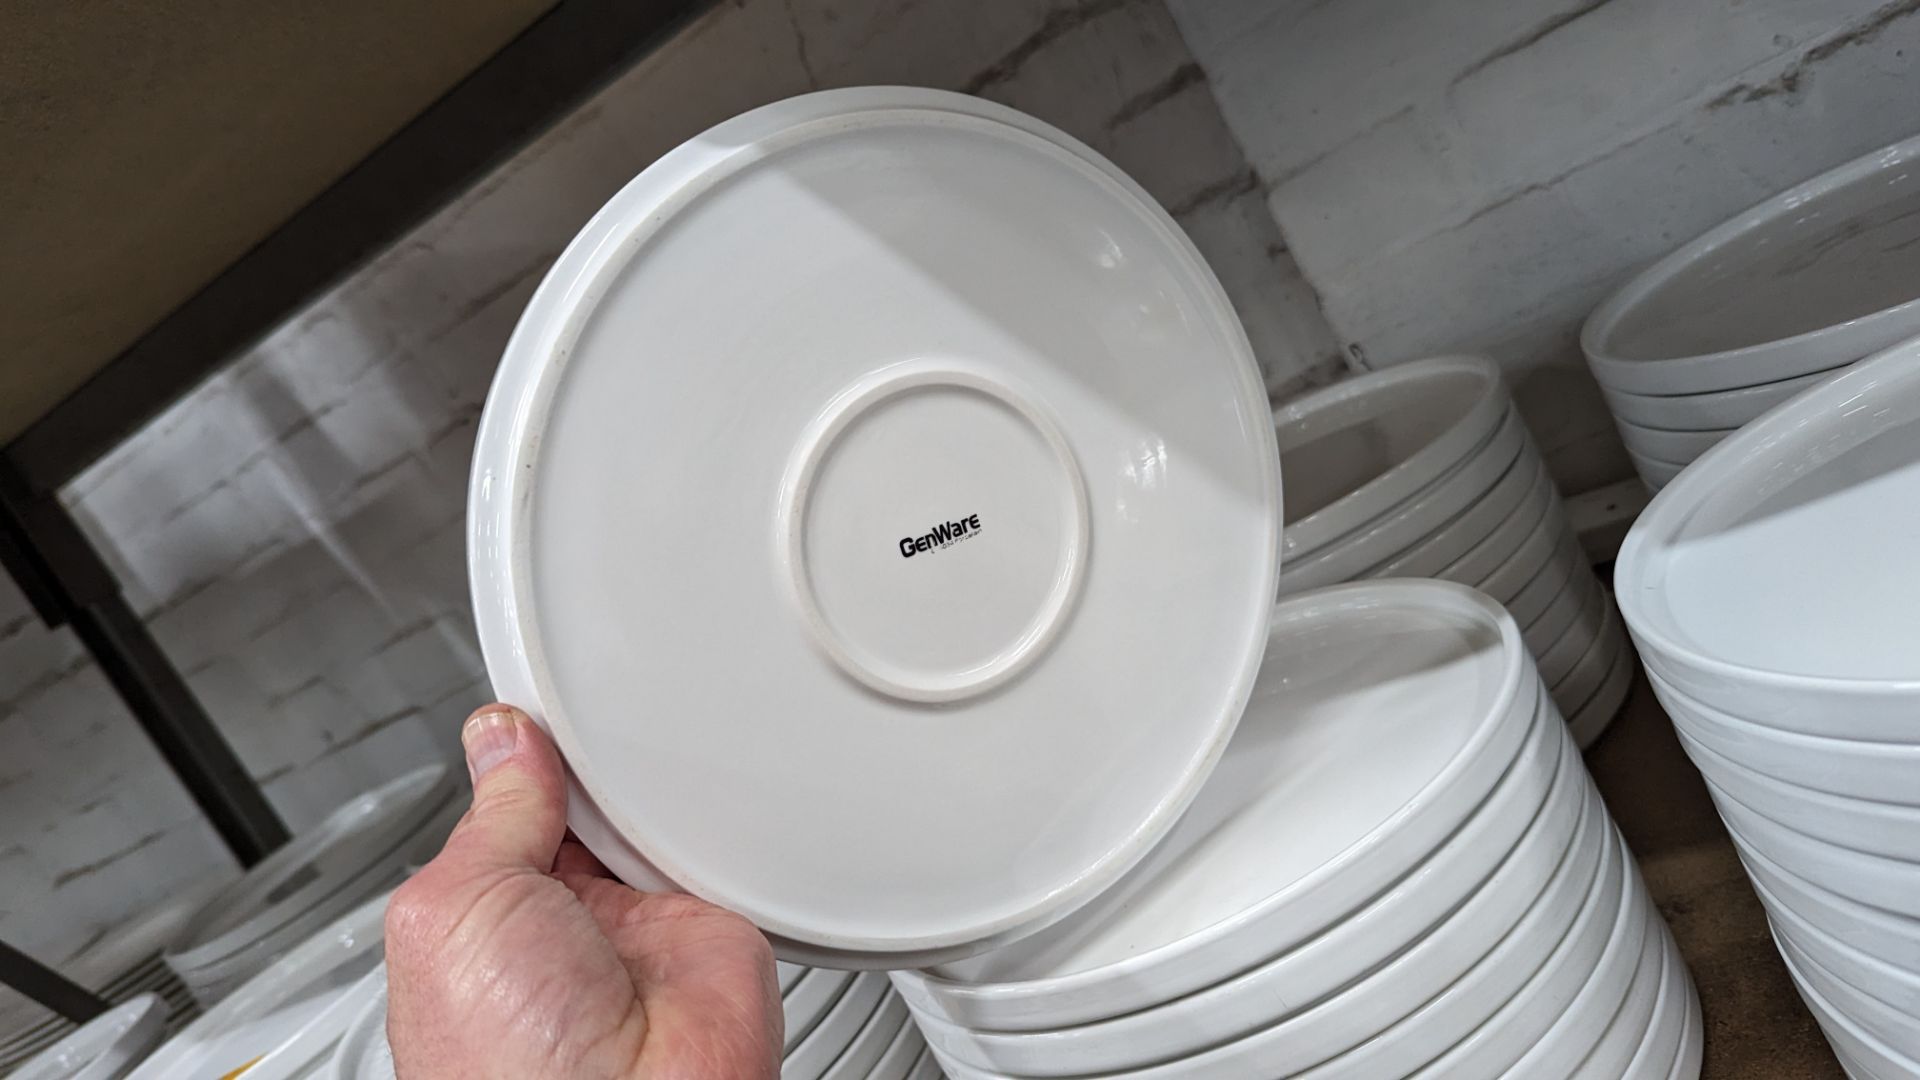 40 off Genware 245mm round flat plates with upright rim to the outer edge - Image 7 of 7